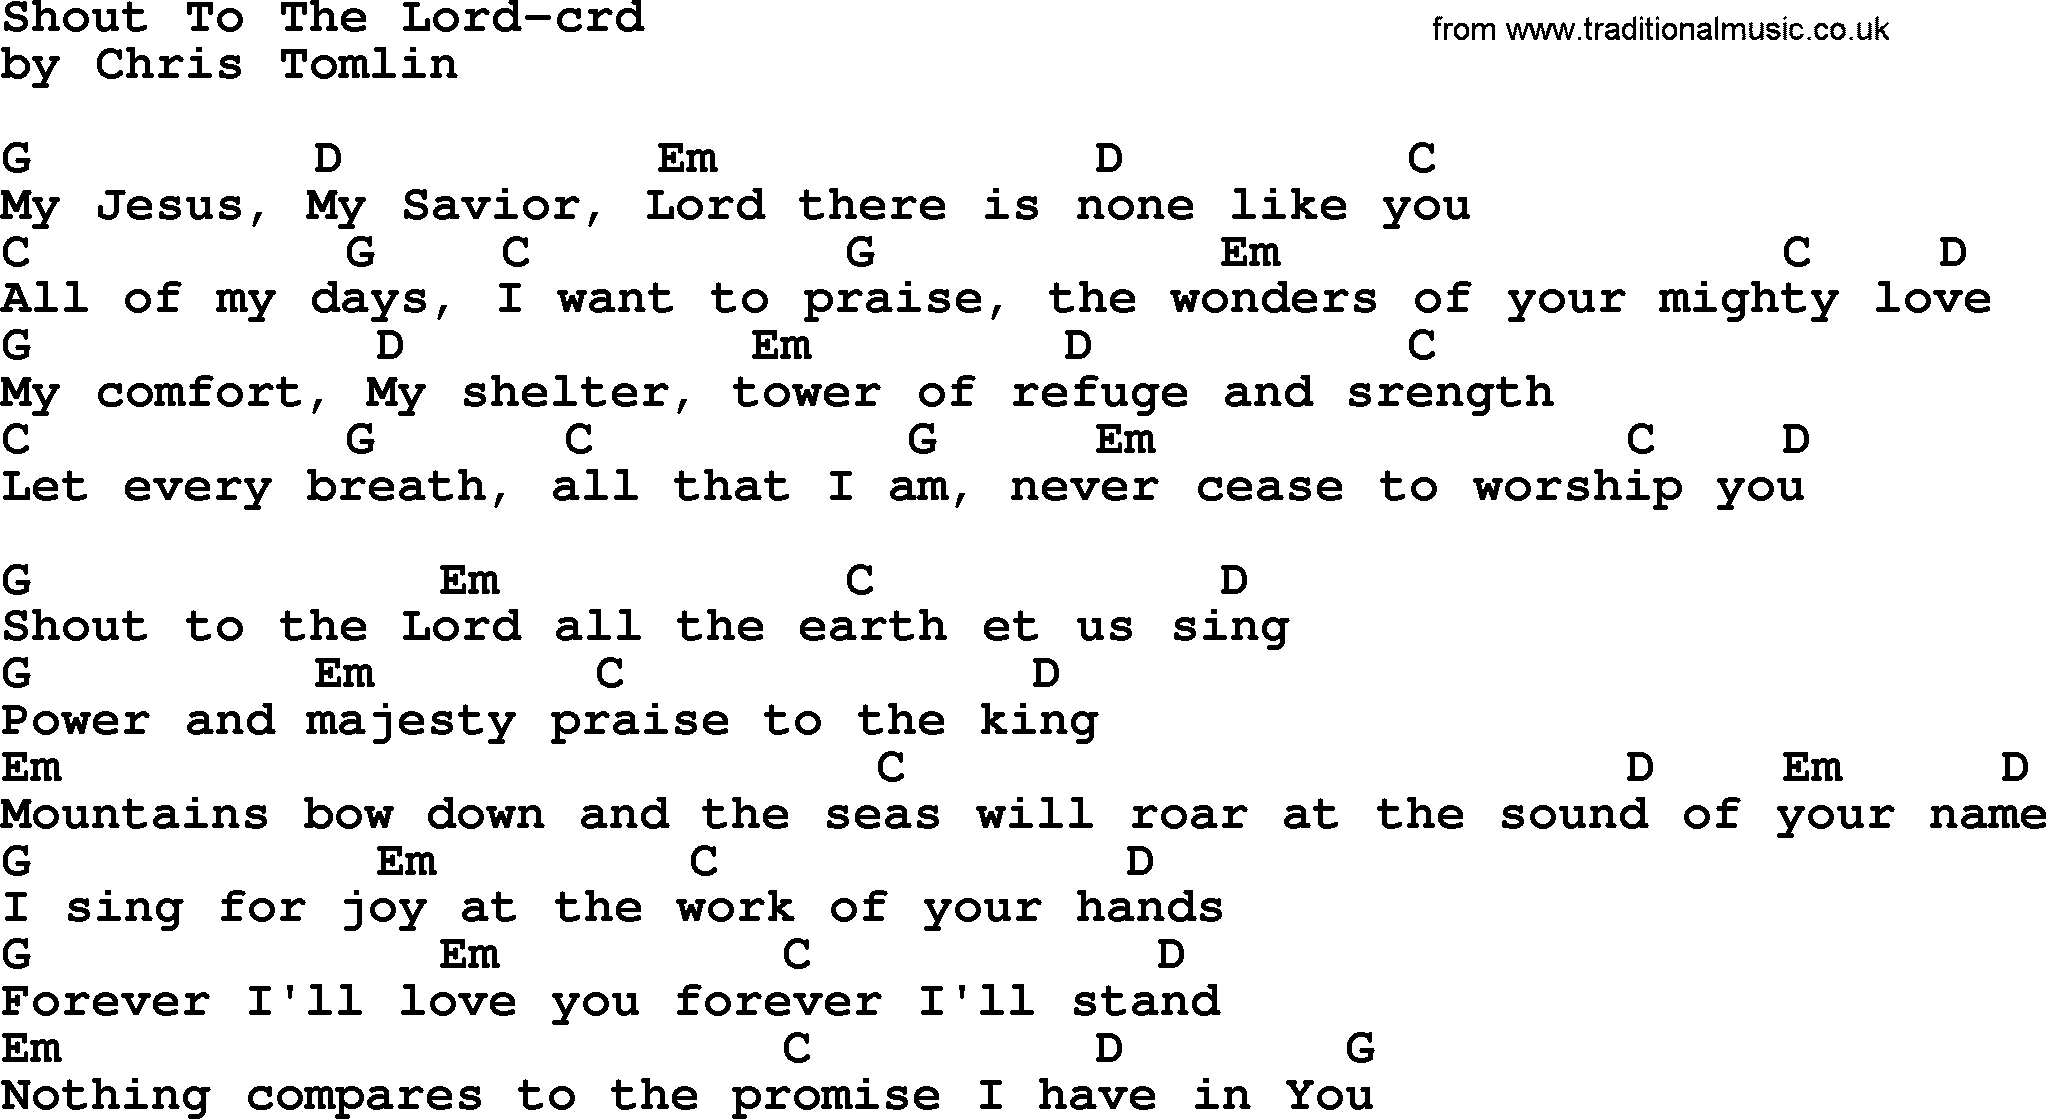 Top 500 Hymn: Shout To The Lord - lyrics, chords and PDF.